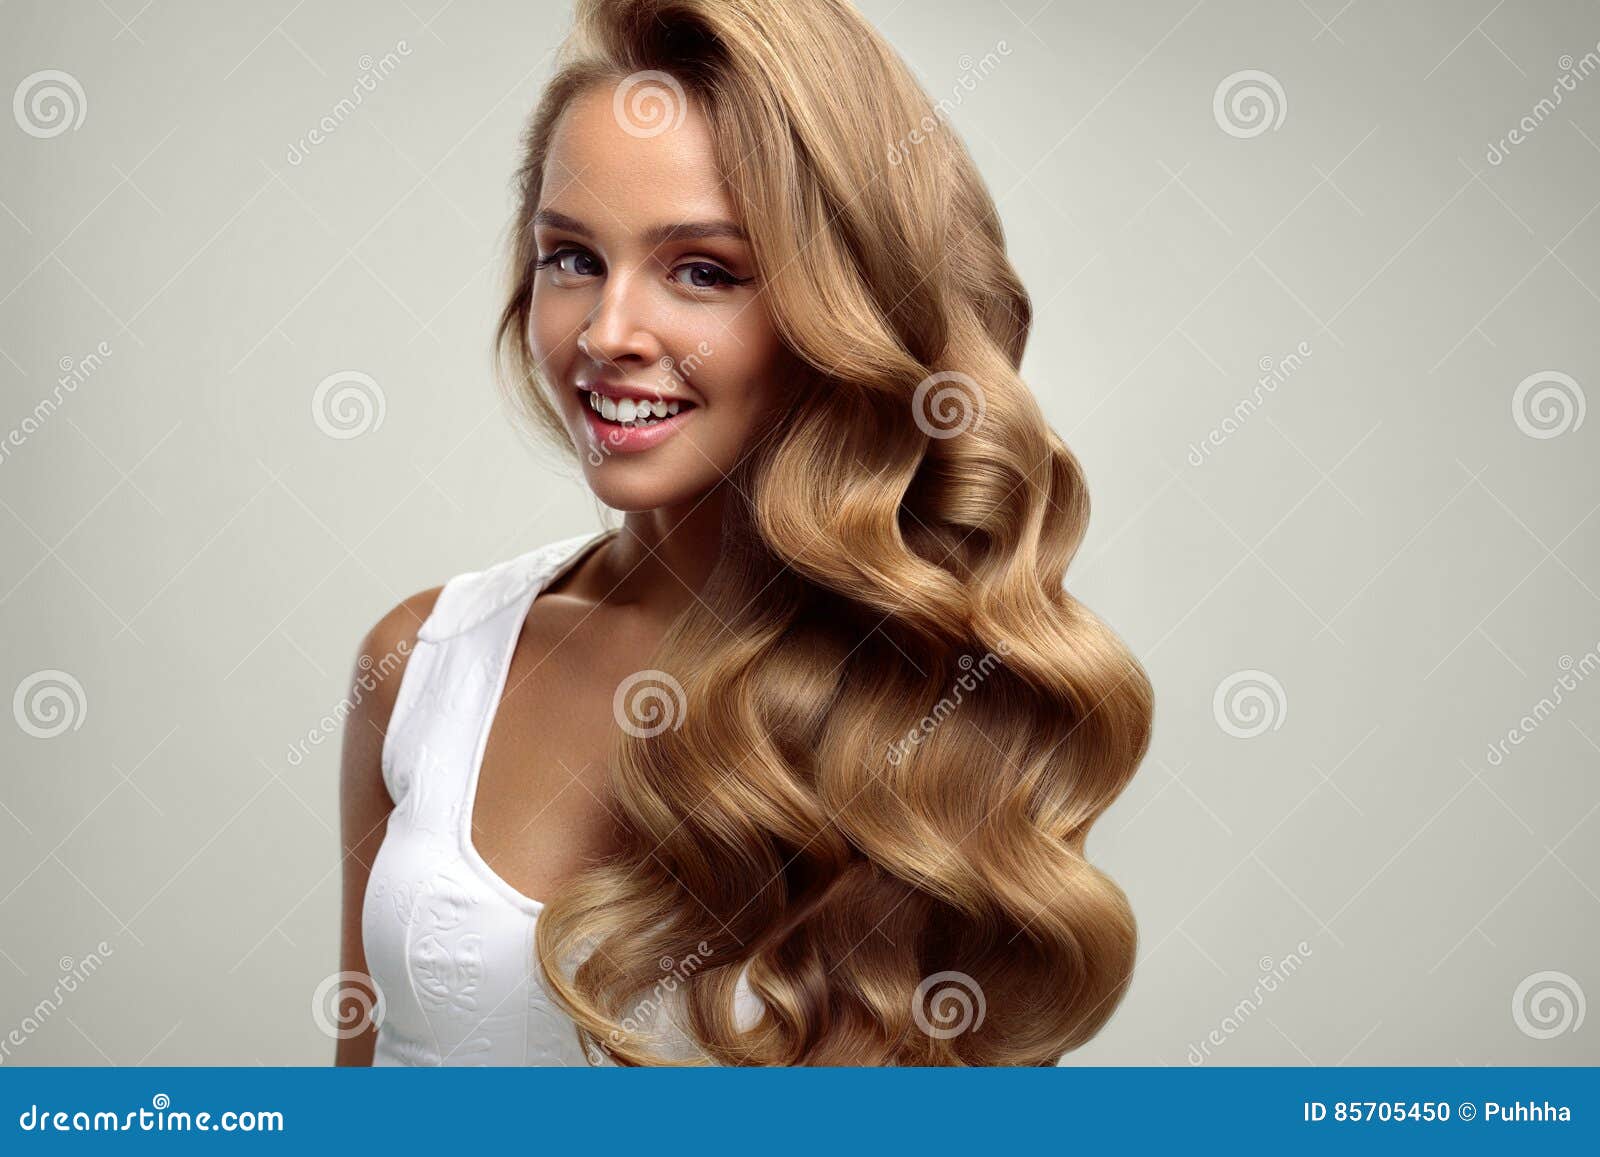 Beauty Beautiful Woman With Long Blonde Curly Hair Hairstyle